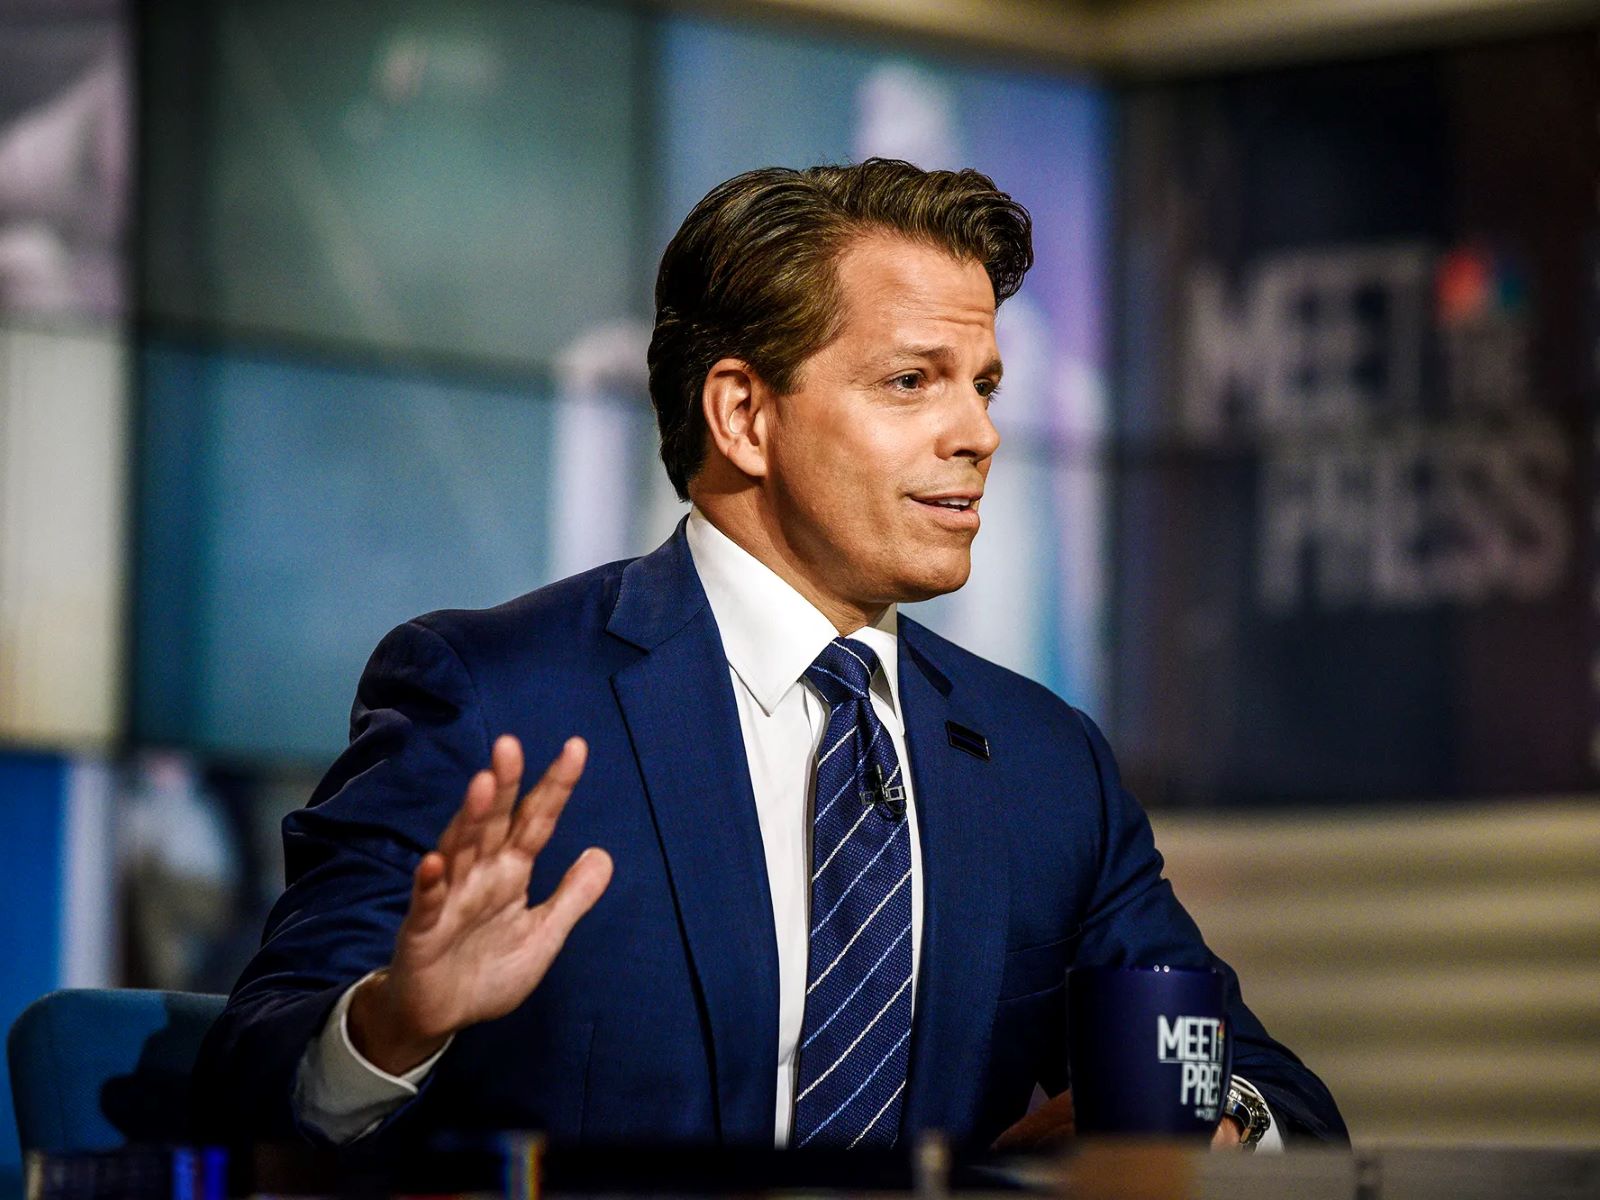 10-captivating-facts-about-anthony-scaramucci